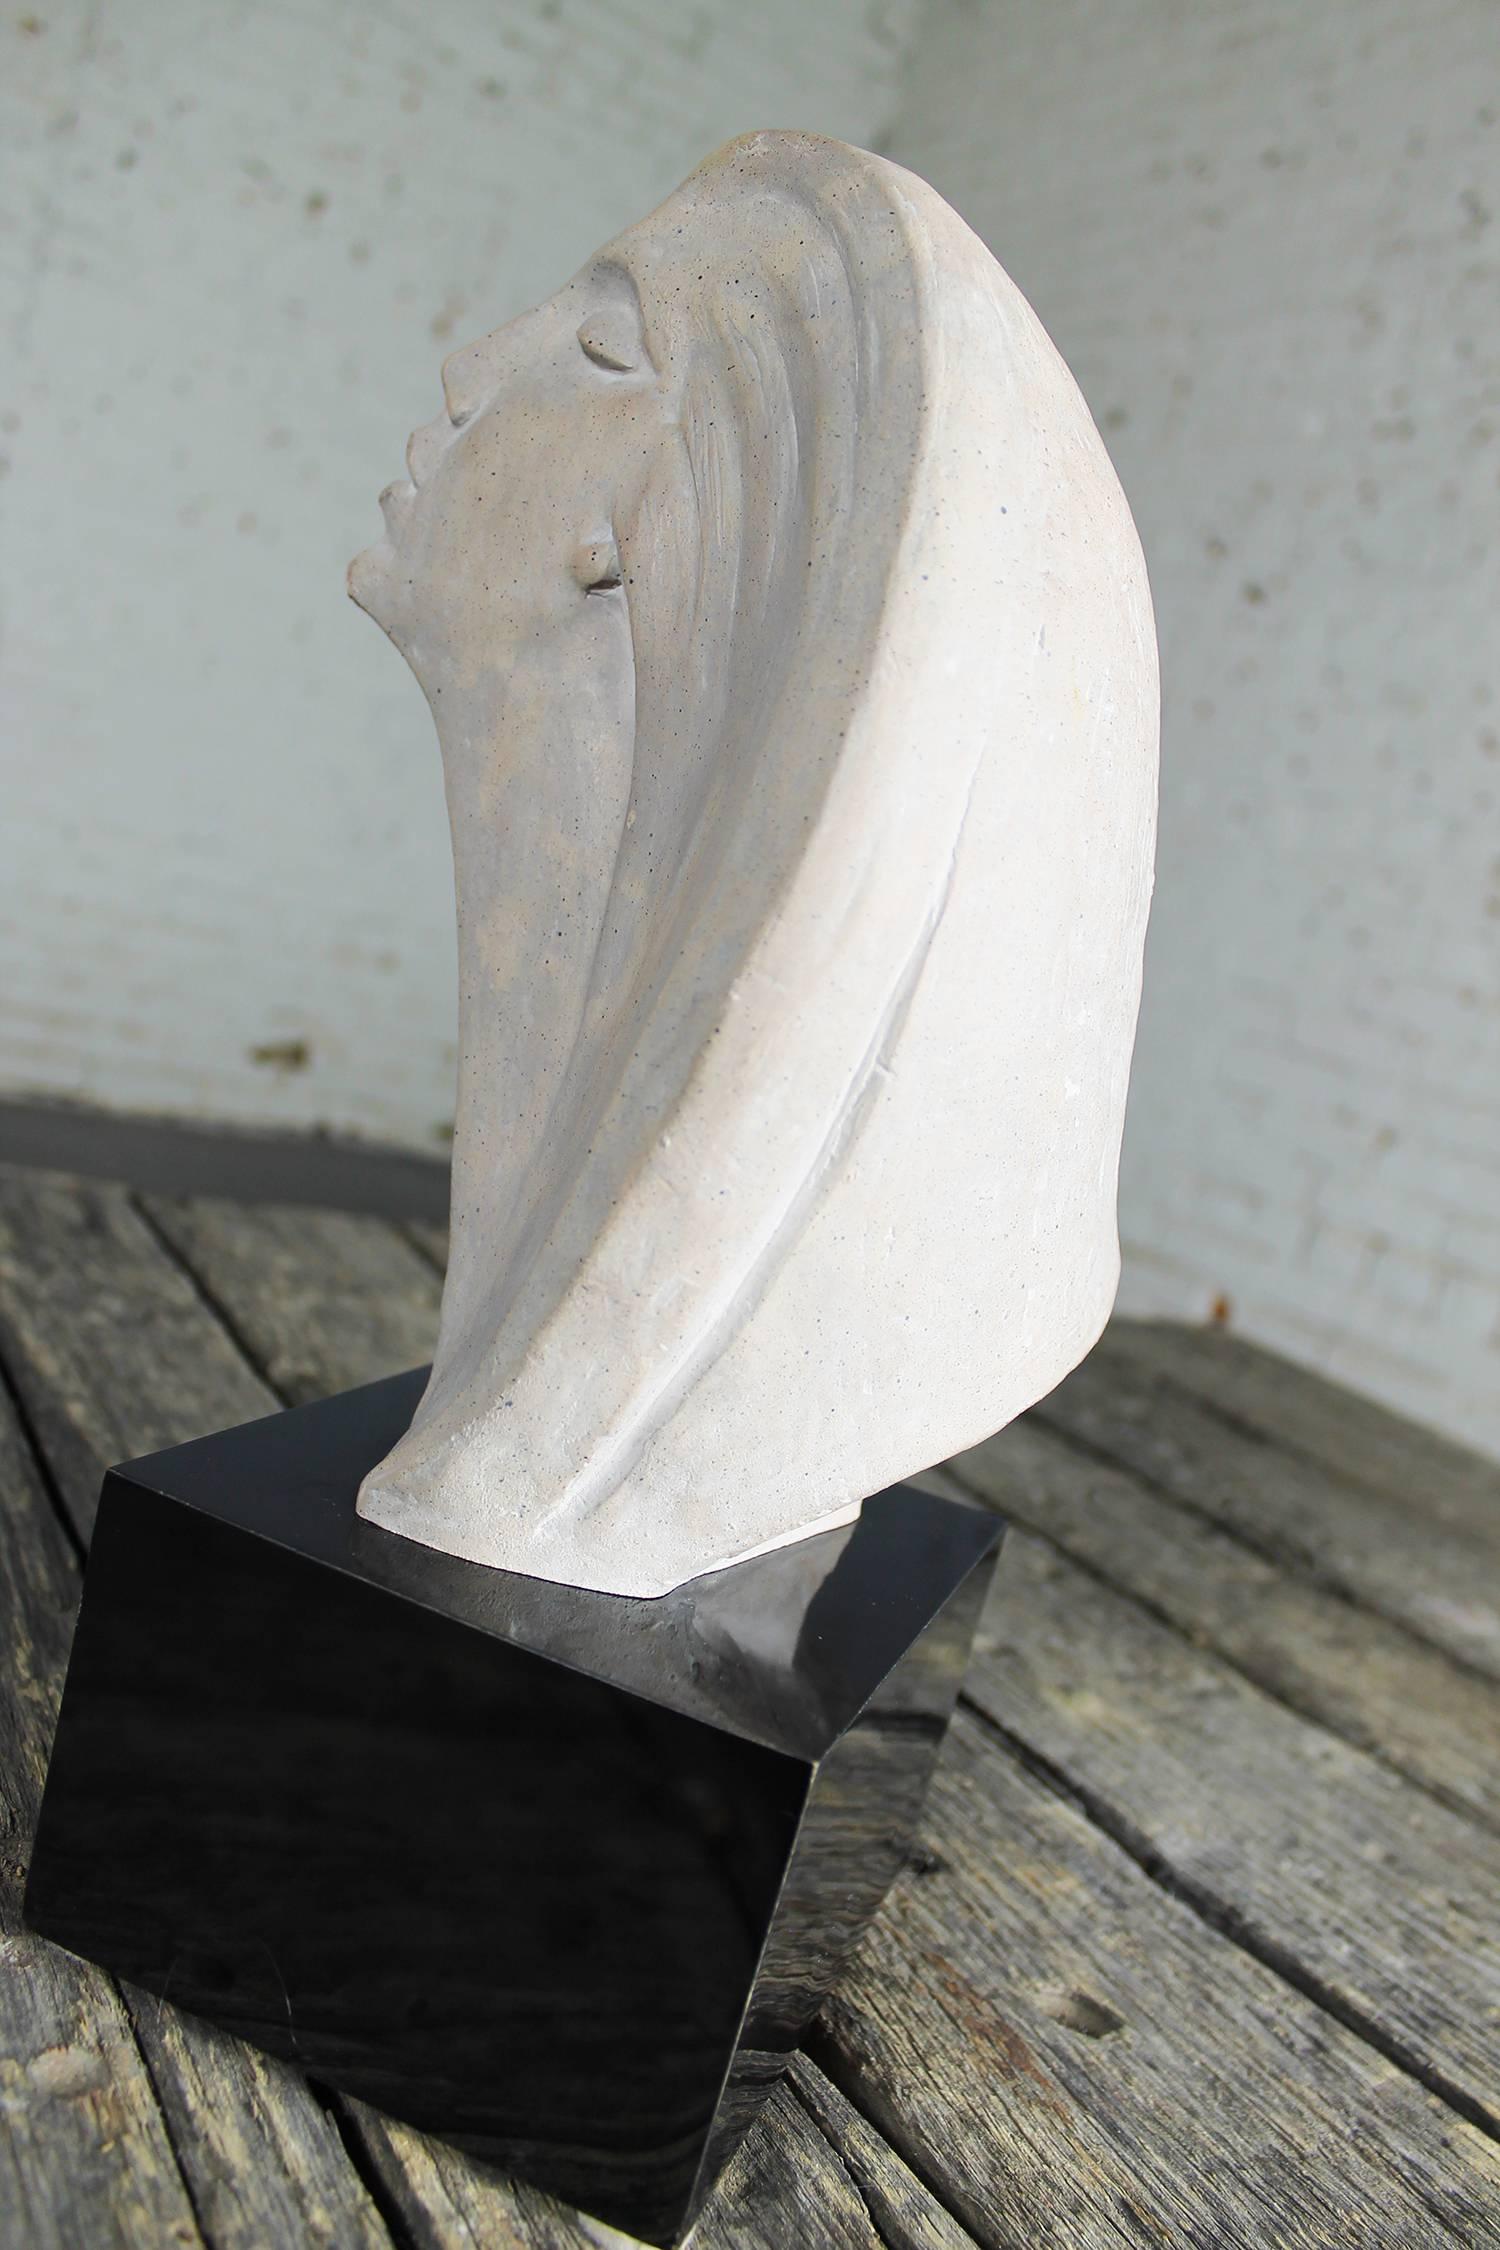 Awesome Mid-Century Modern stylized female bust sculpture titled Stargazer from Austin Productions by David Fisher, circa 1980. It is in wonderful vintage condition with no flaws we have found.

This is an incredible Mid-Century Modern sculpture.